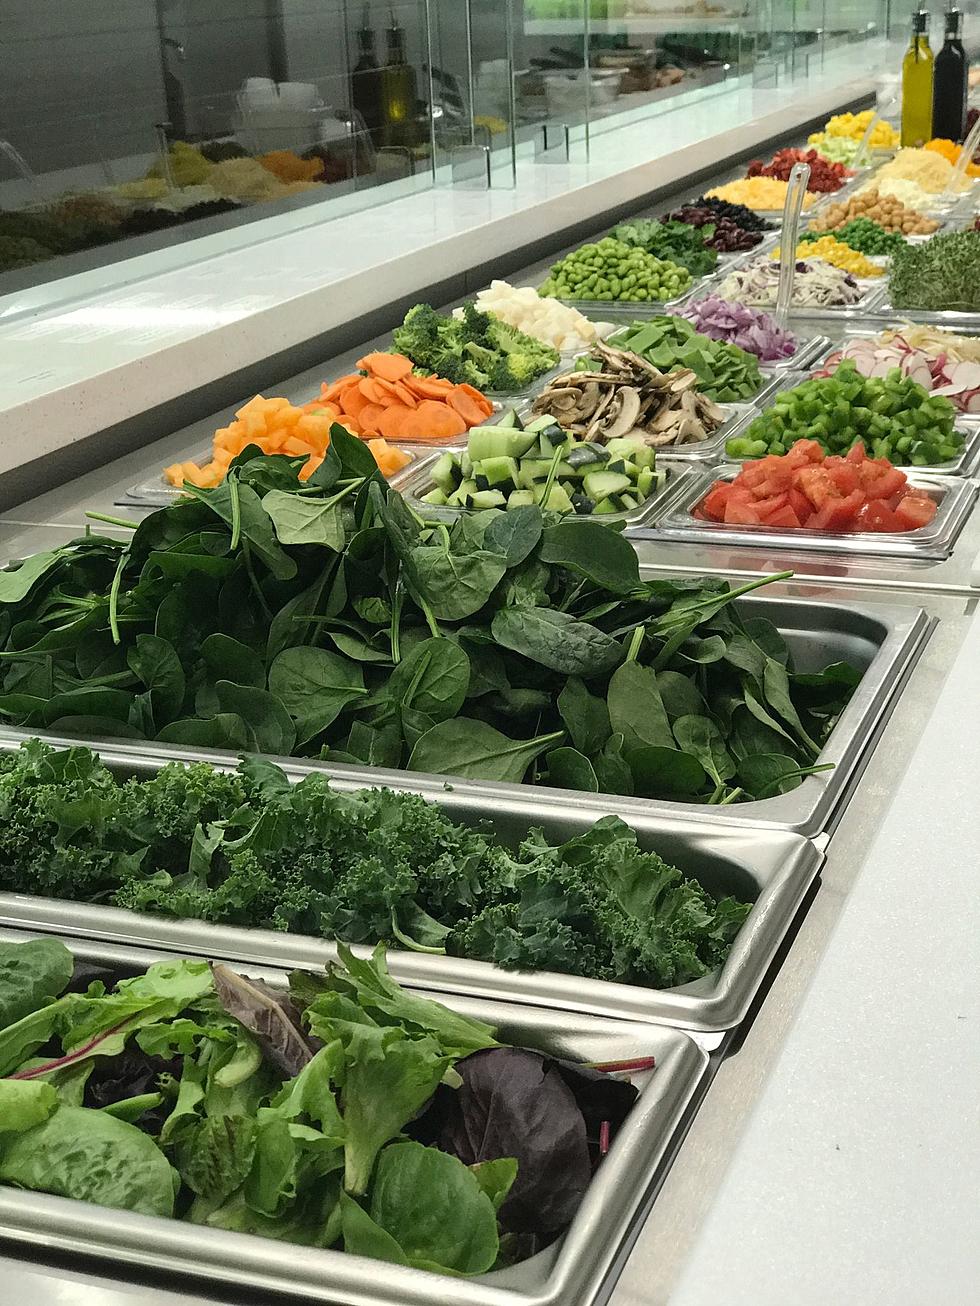 Looking For A Good Salad Bar? Lubbock Might Be Getting One Sooner Than You Think